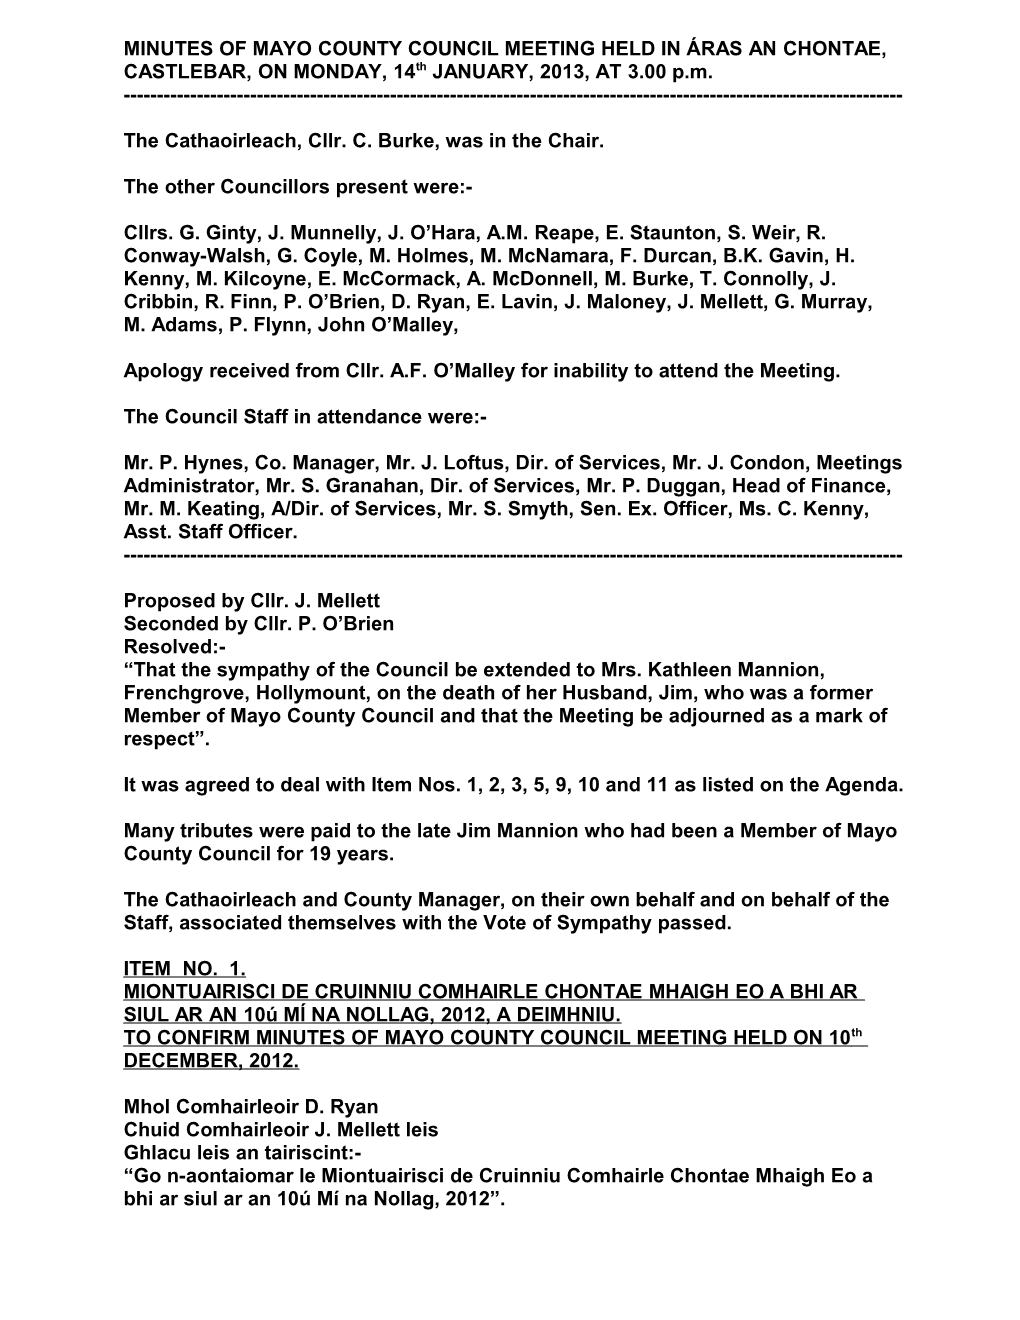 MINUTES of MAYO COUNTY COUNCIL MEETING HELD on MONDAY, 14Th JANUARY, 2013, at 3